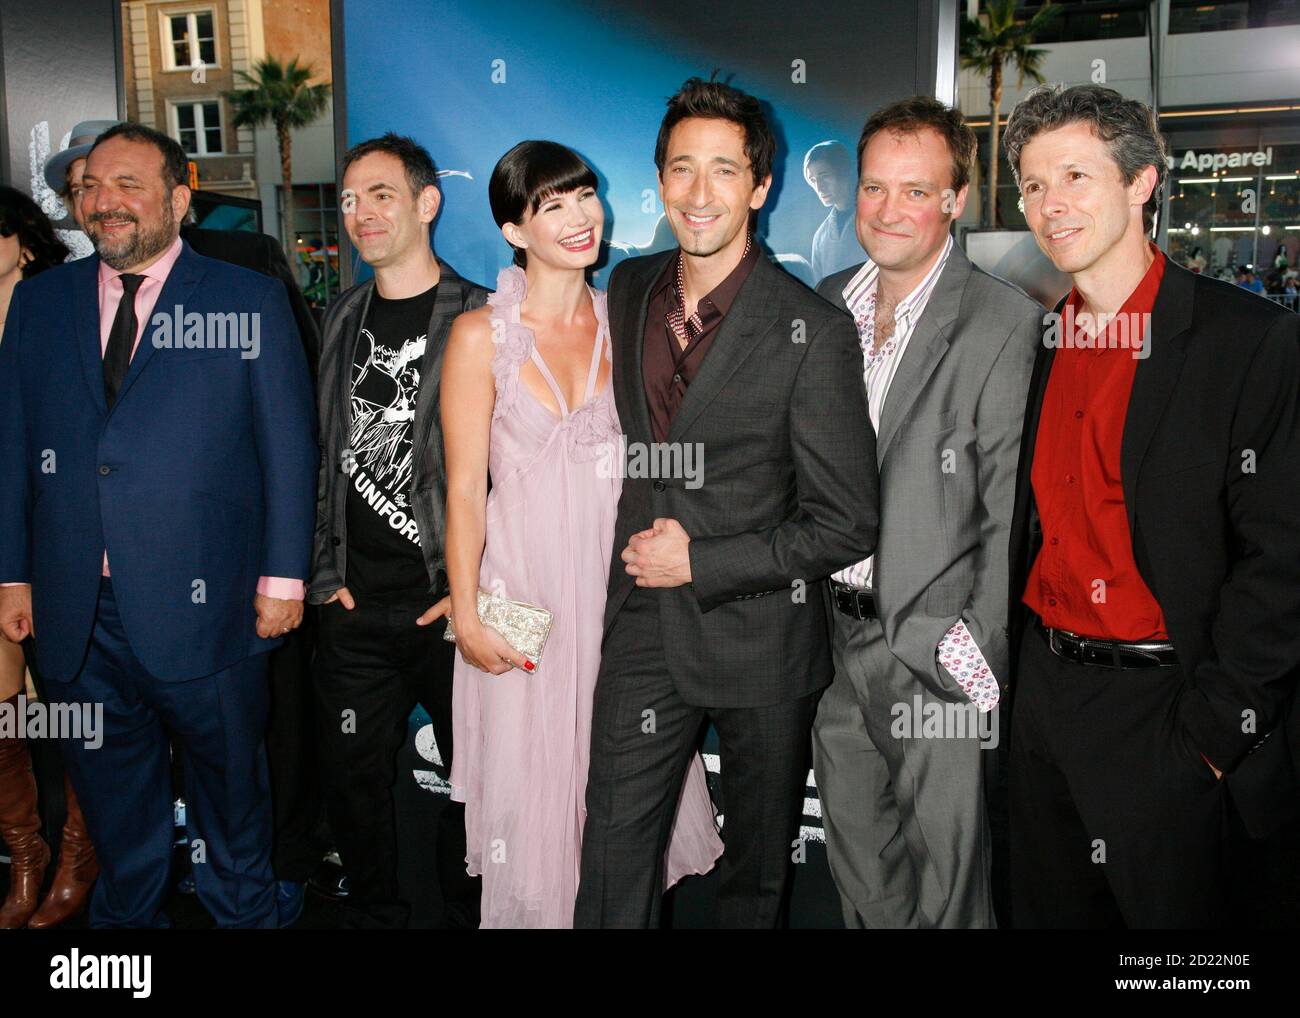 L-R) Producer Joel Silver, director Vincenzo Natali, cast members Delphine  Chaneac, Adrien Brody and David Hewlett and producer Steven Hoban arrive  for the premiere of the film "Splice" in Hollywood, California on